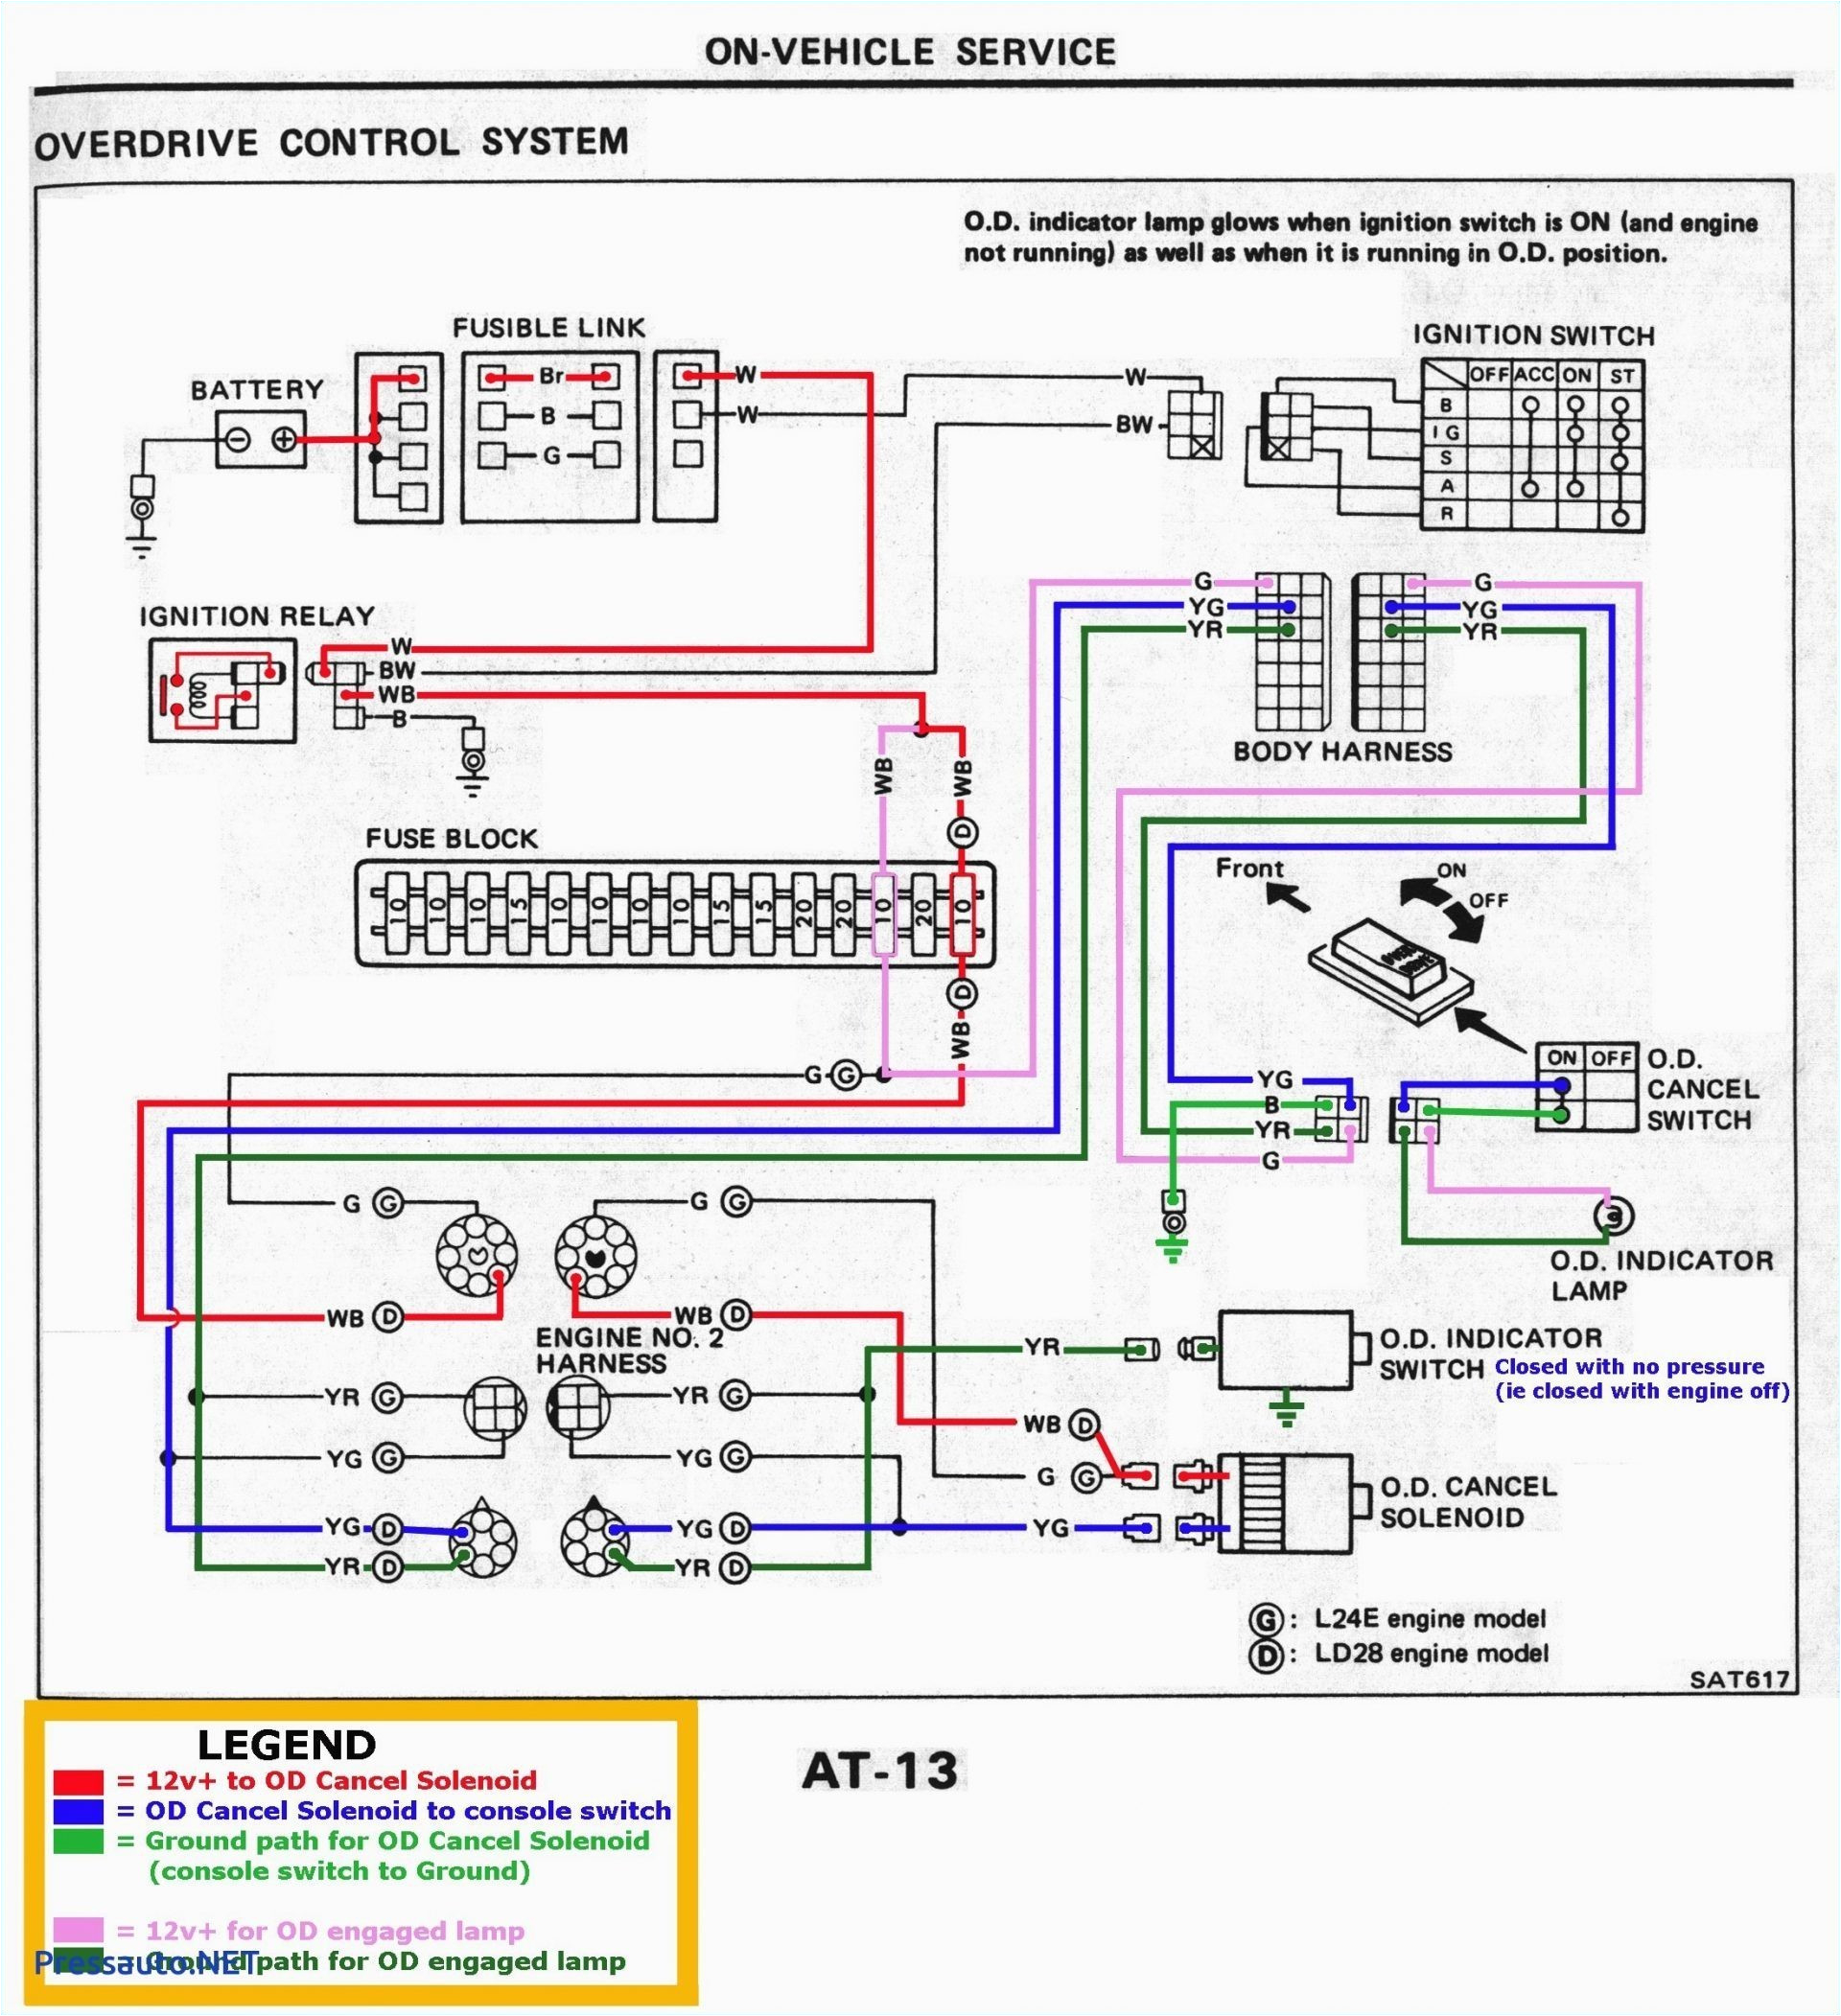 Tow Hitch Electrical Wiring Diagram Dodge tow Package Wiring Diagram Wiring Diagram Post